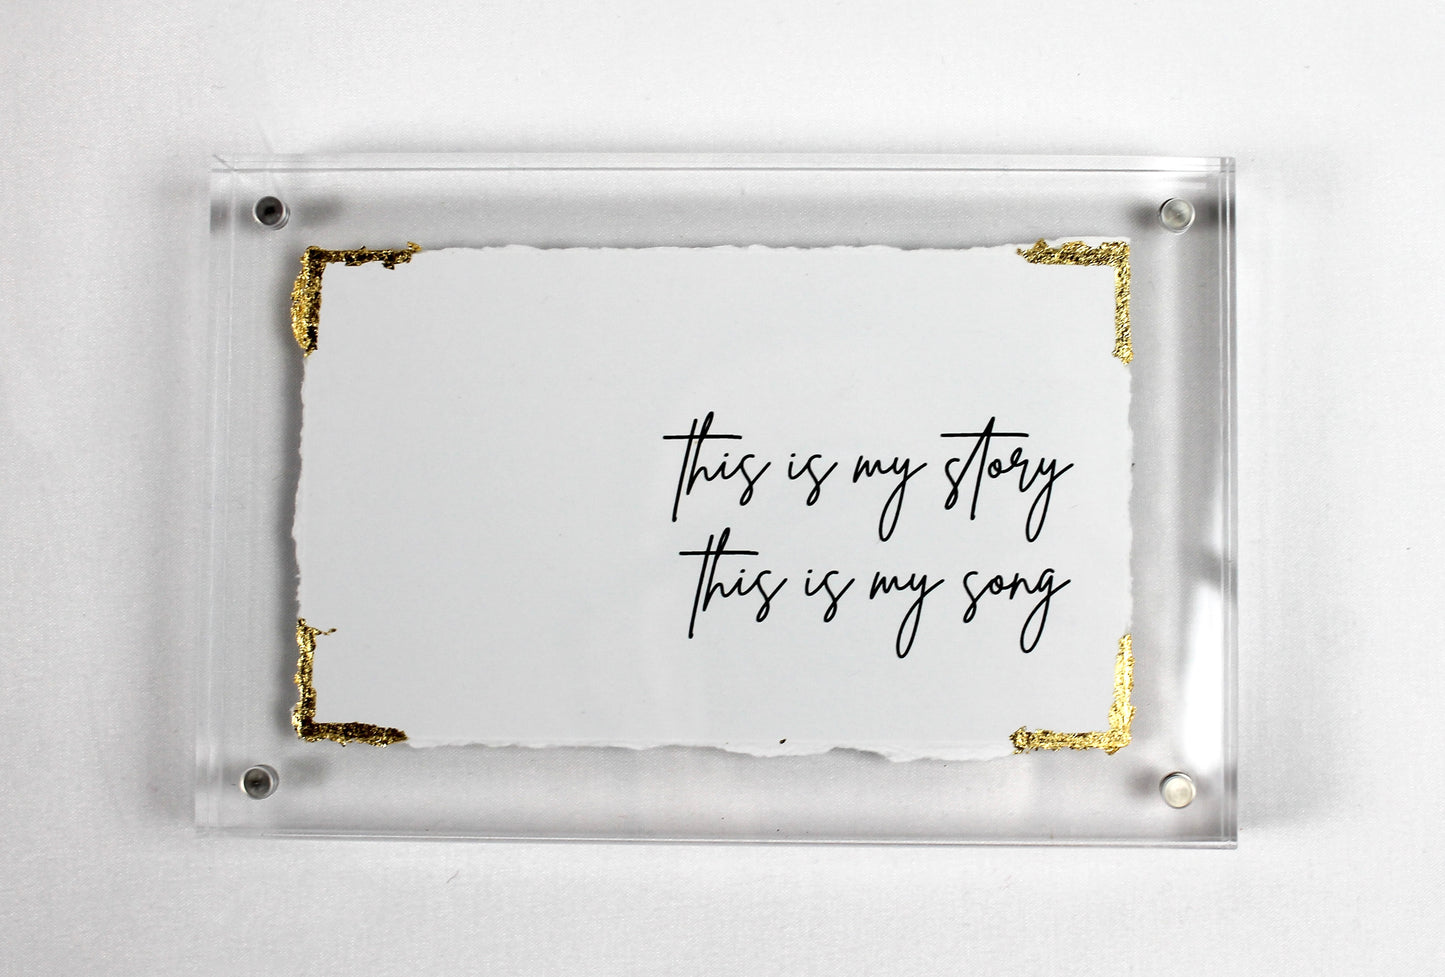 This is my story - Acrylic Frame